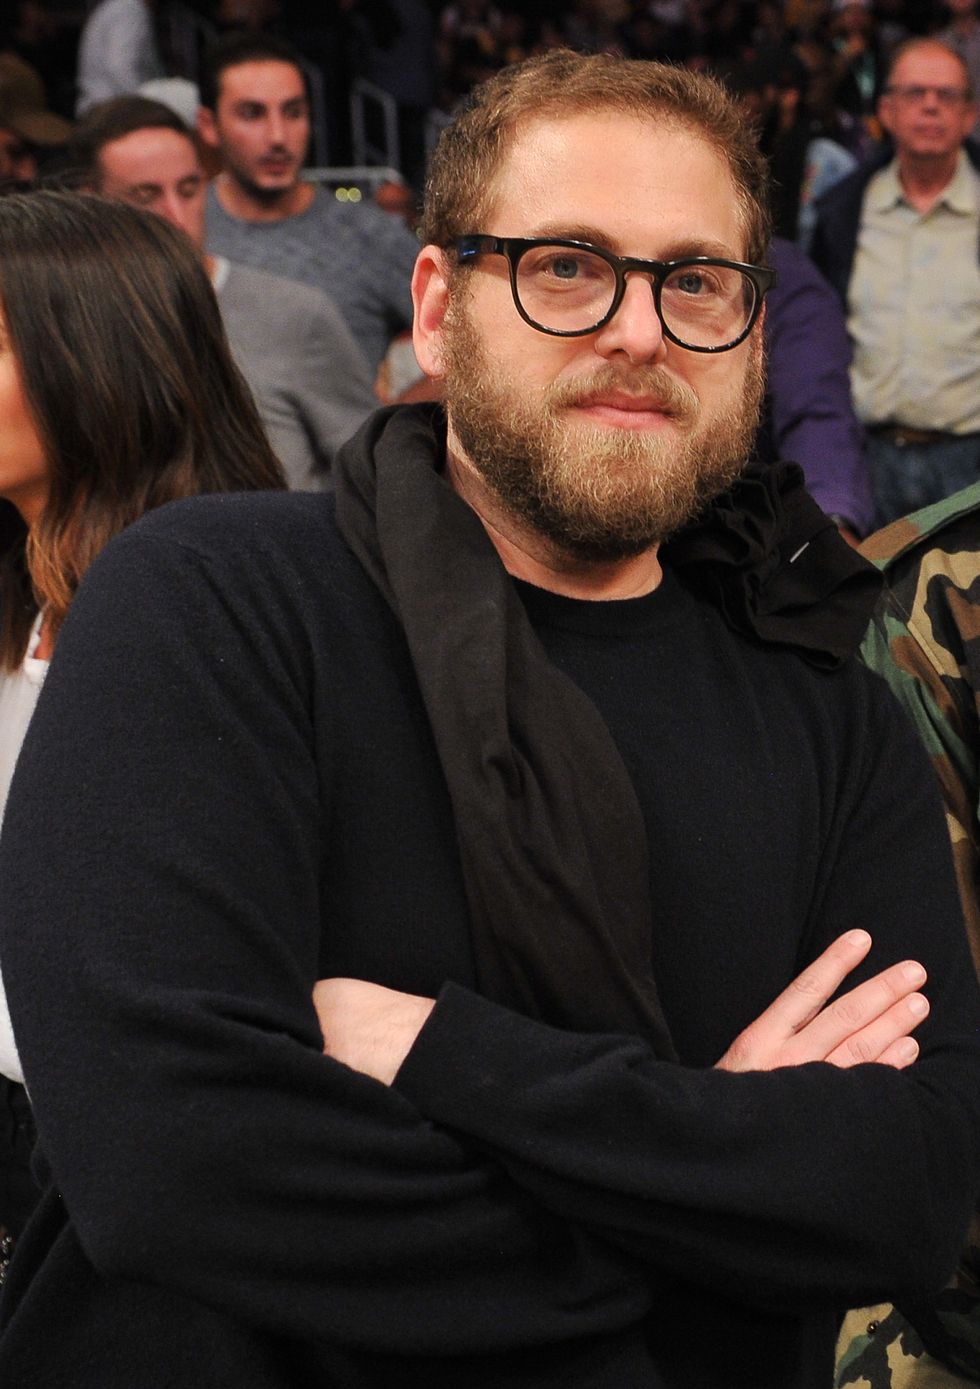 Jonah Hill attends a basketball game between the Los Angeles Lakers and the Houston Rockets at Staples Center on October 20, 2018 in Los Angeles